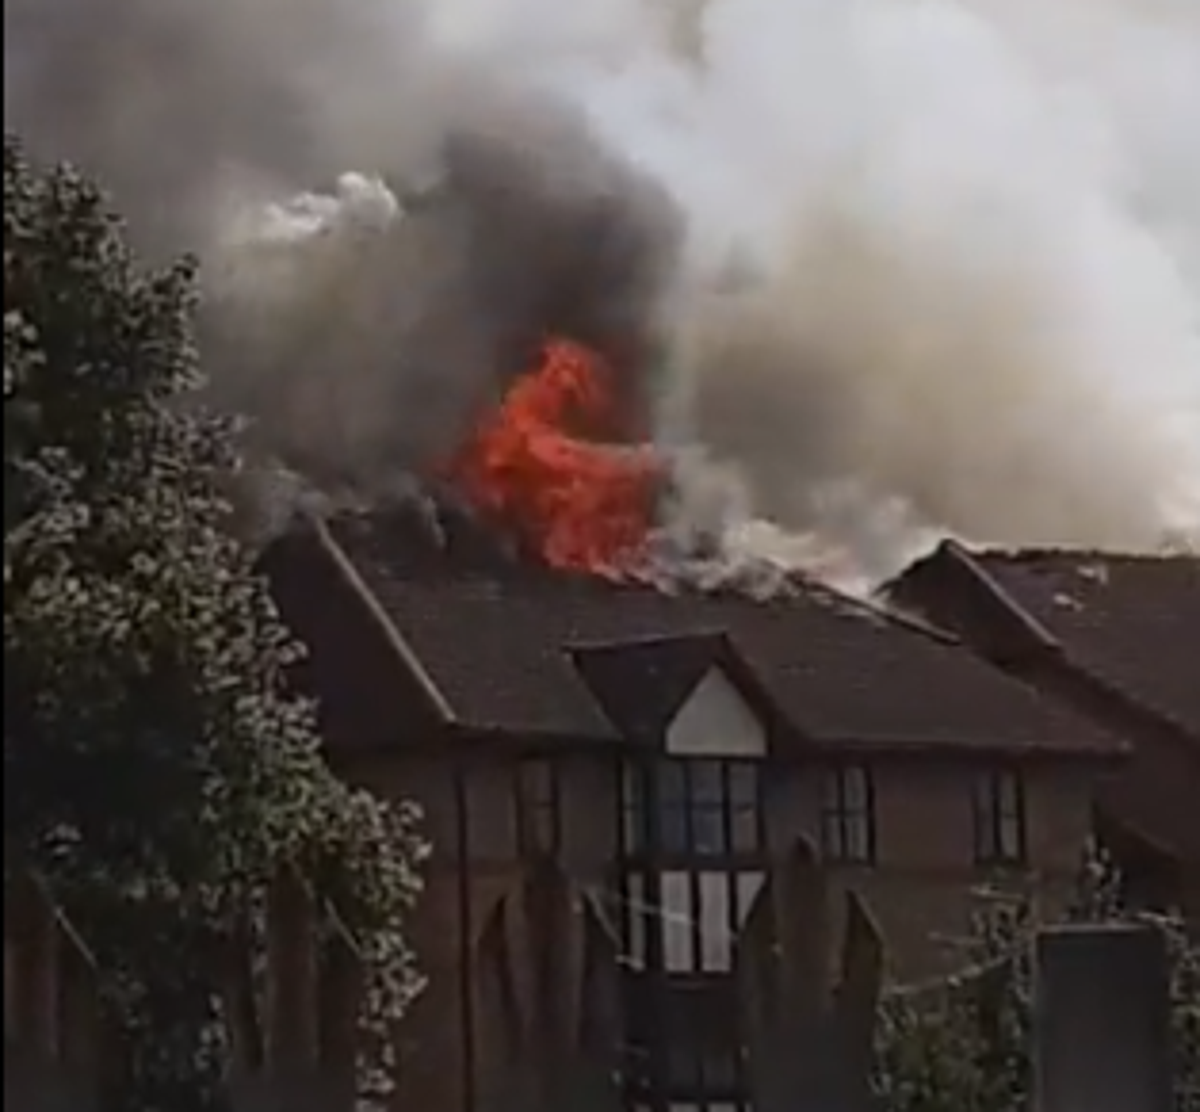 Major incident declared after ‘explosion’ at block of flats in Bedford